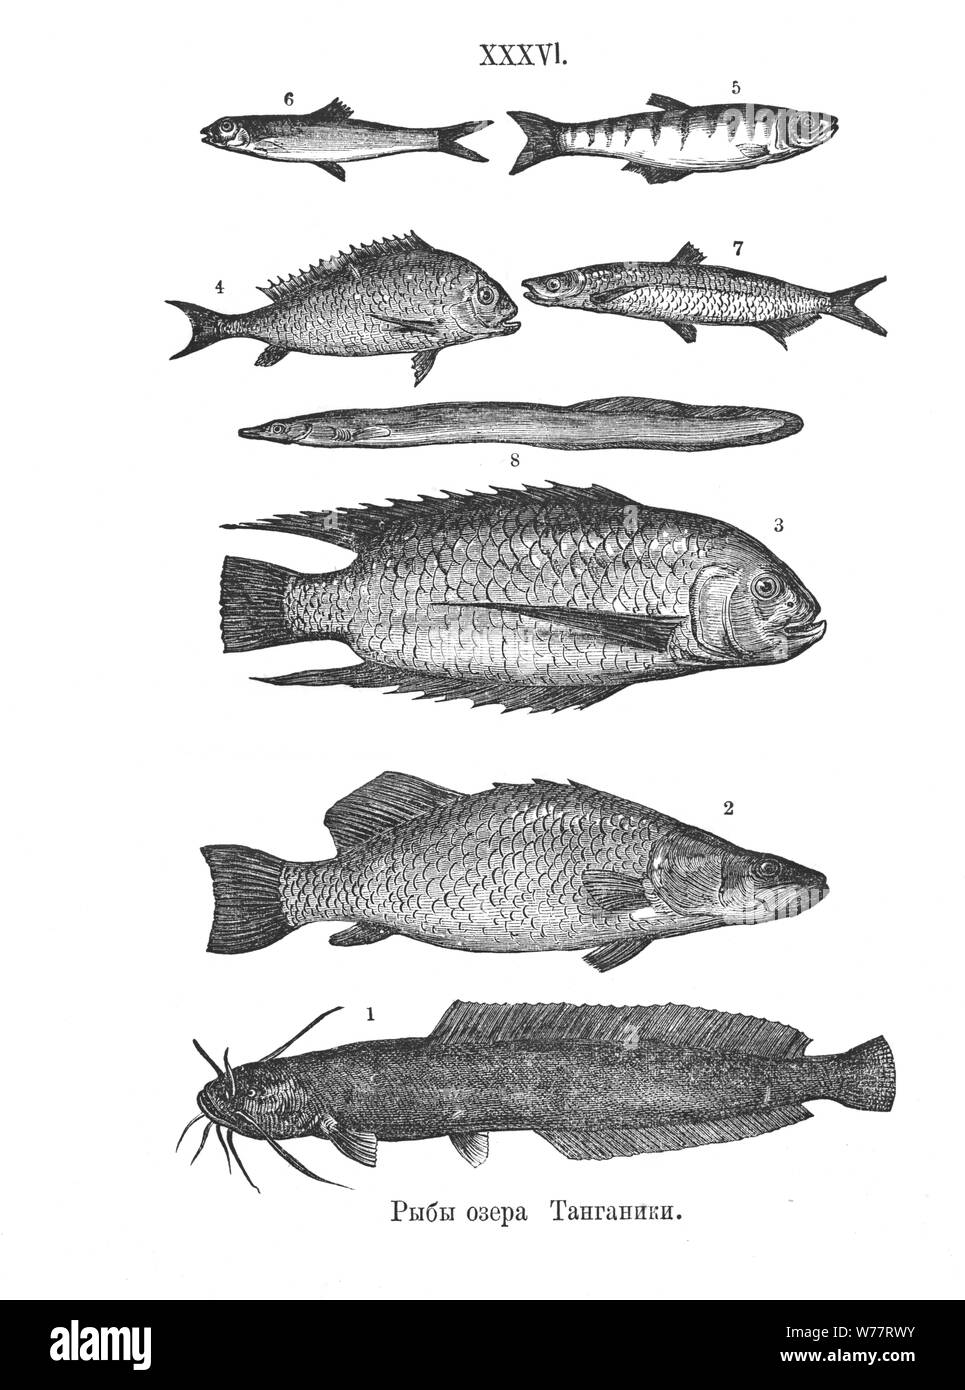 Fishes of Lake Tanganyika Illustration from Henry Morton Stanley's book How I Found Livingstone. Russia, 1873 Stock Photo